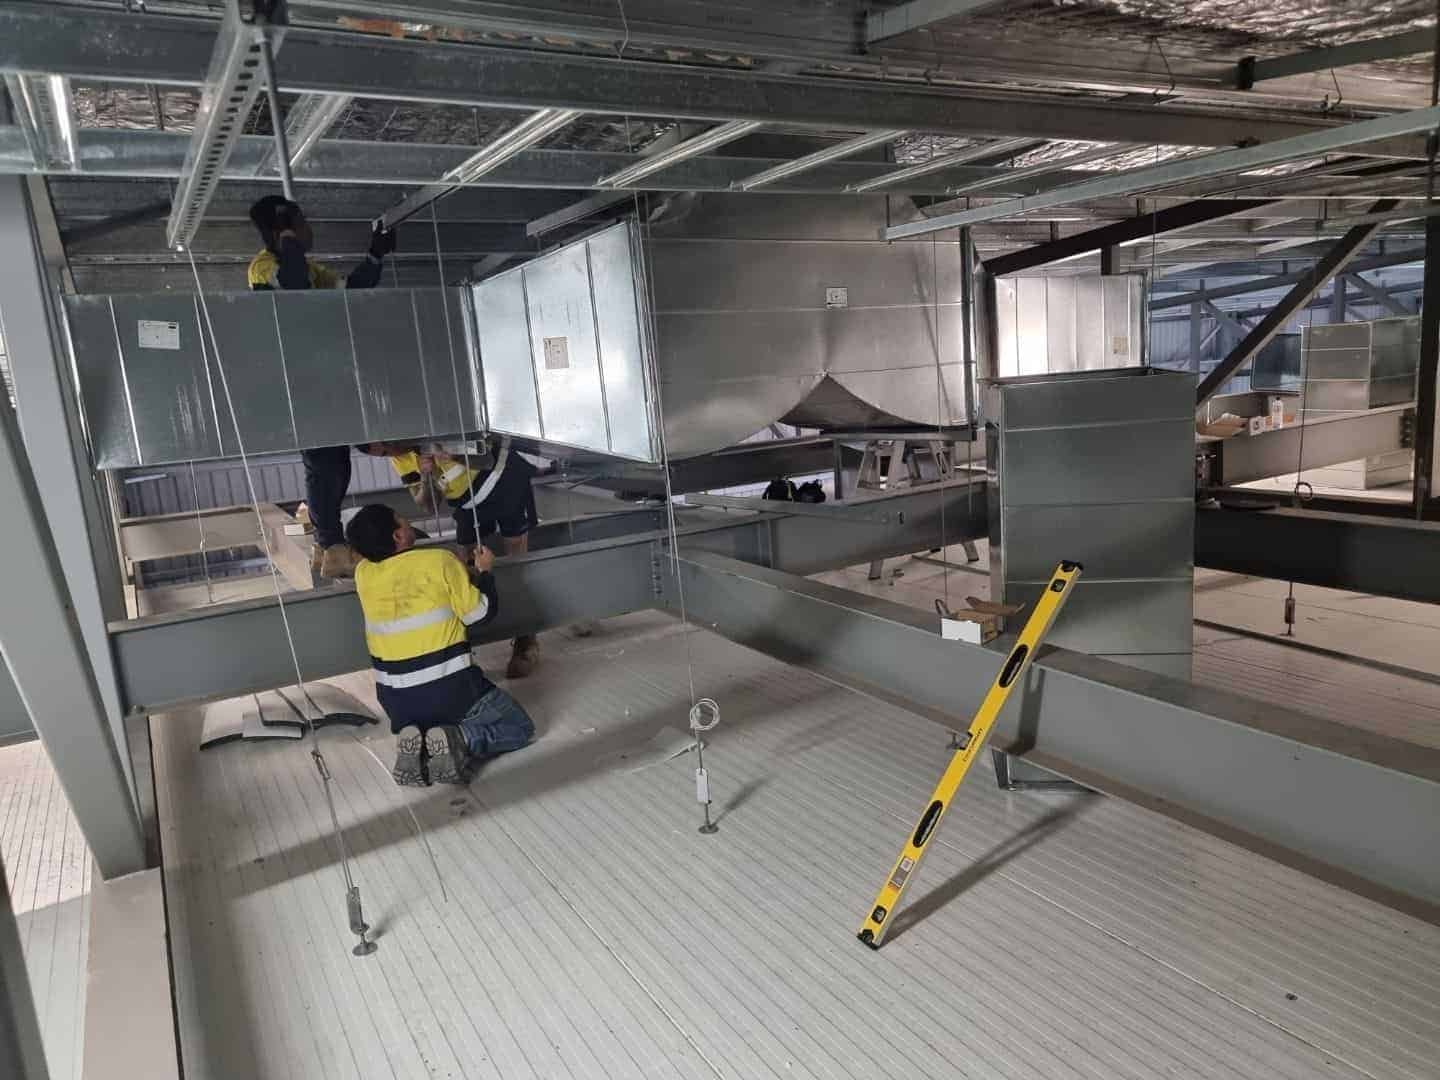 workers spraying passive fire protection